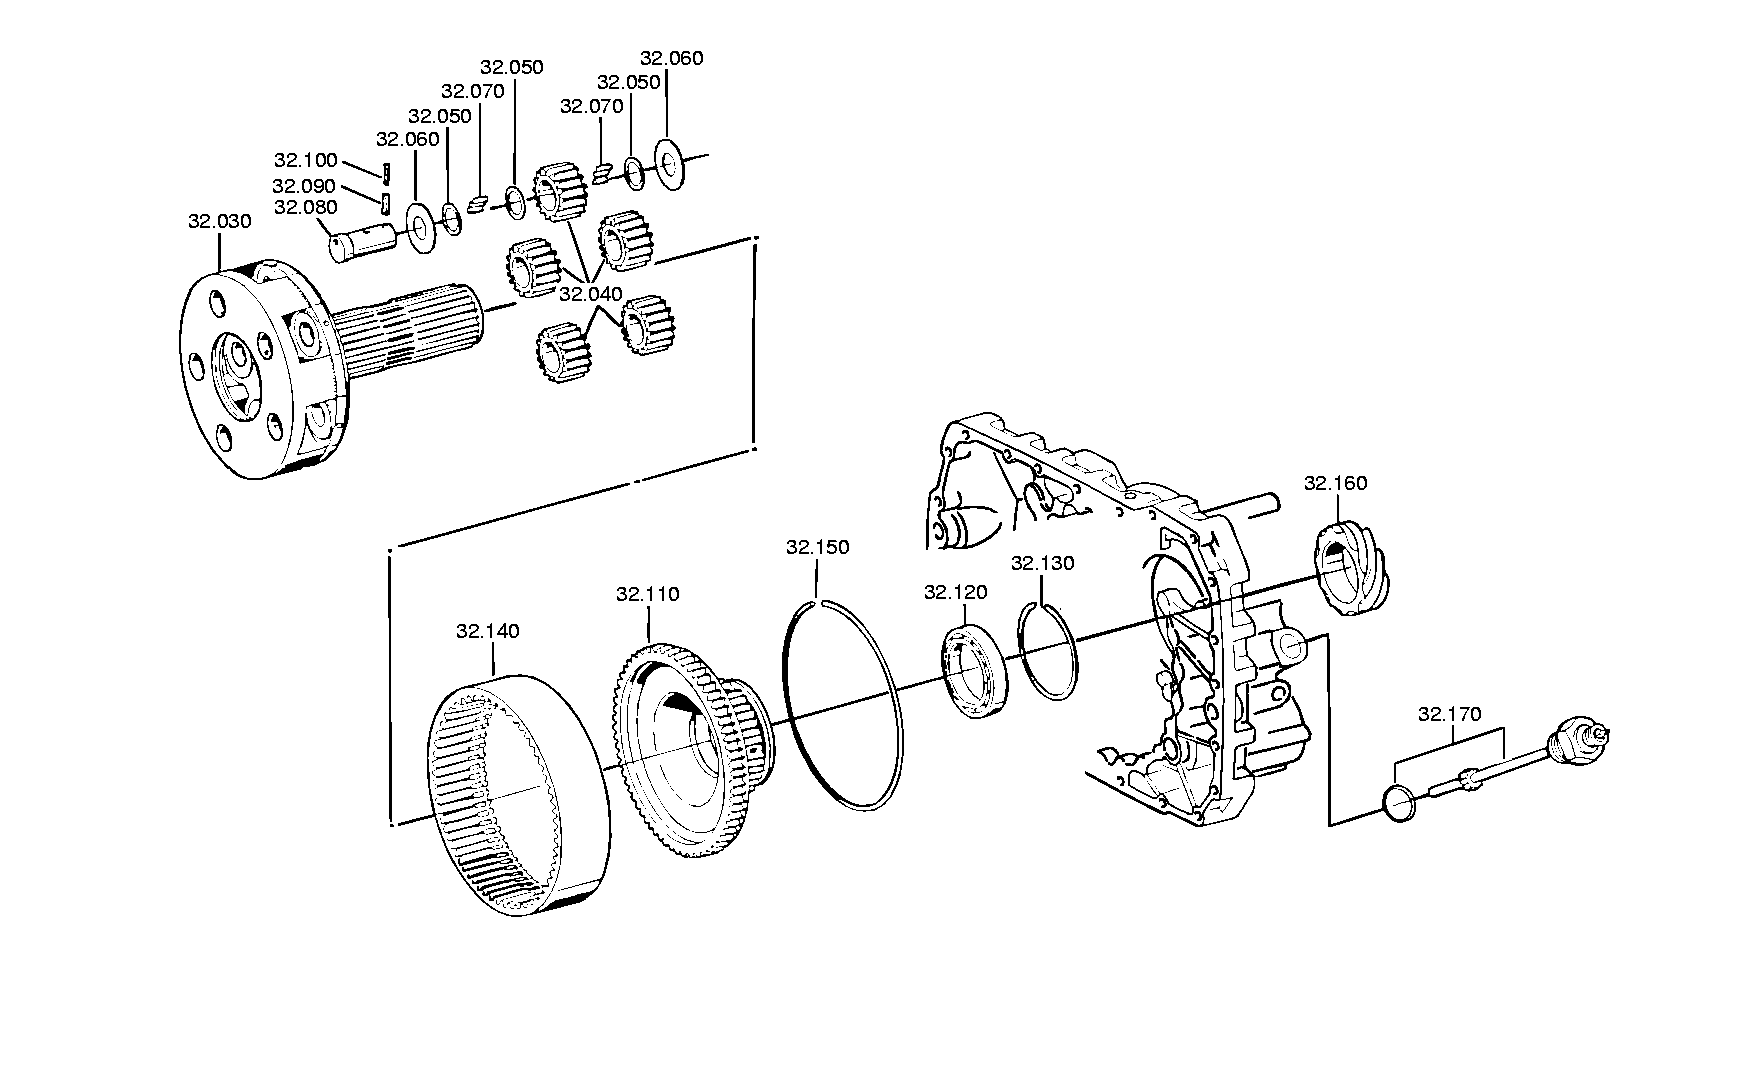 drawing for BAOTOU BEIFANG BENCHI HEAVY DUTY TRUCK A0002640844 - OUTPUT FLANGE (figure 1)